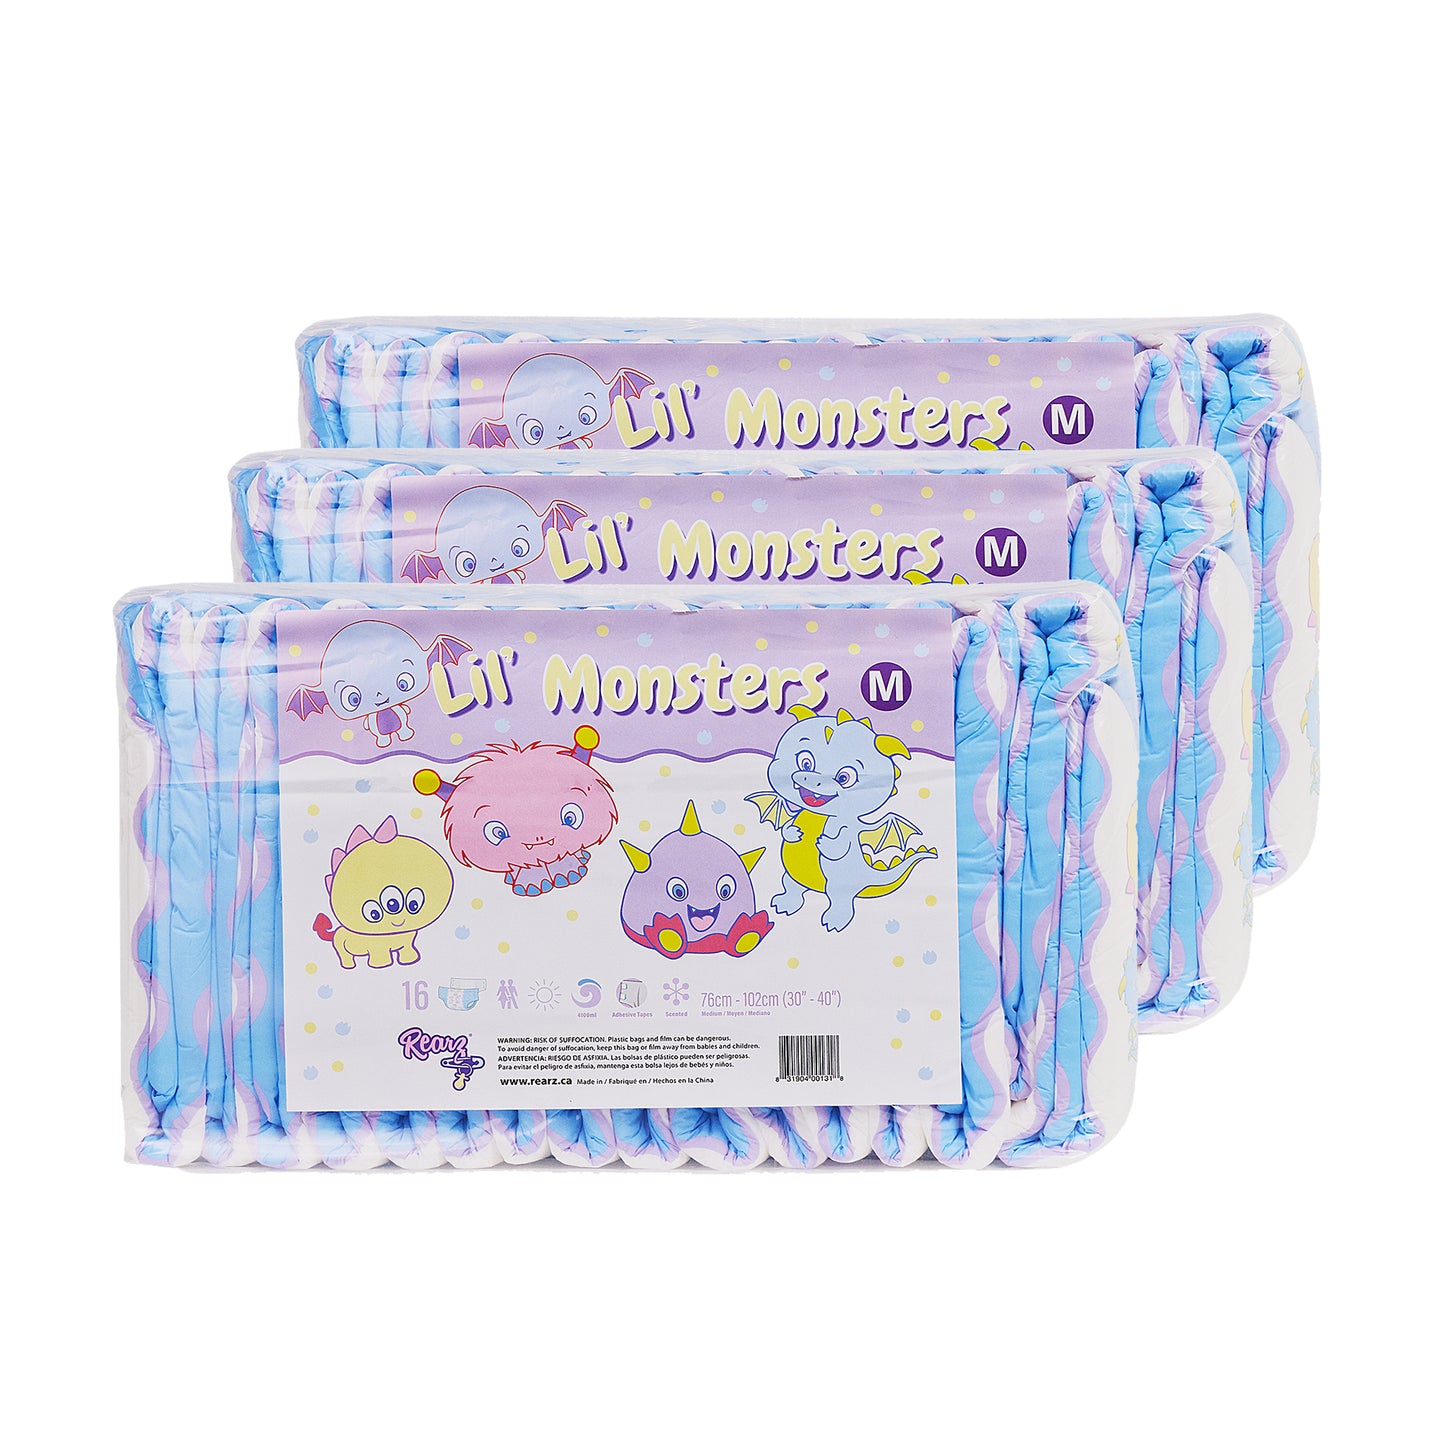 Rearz - Adult Diapers - Lil' Monsters